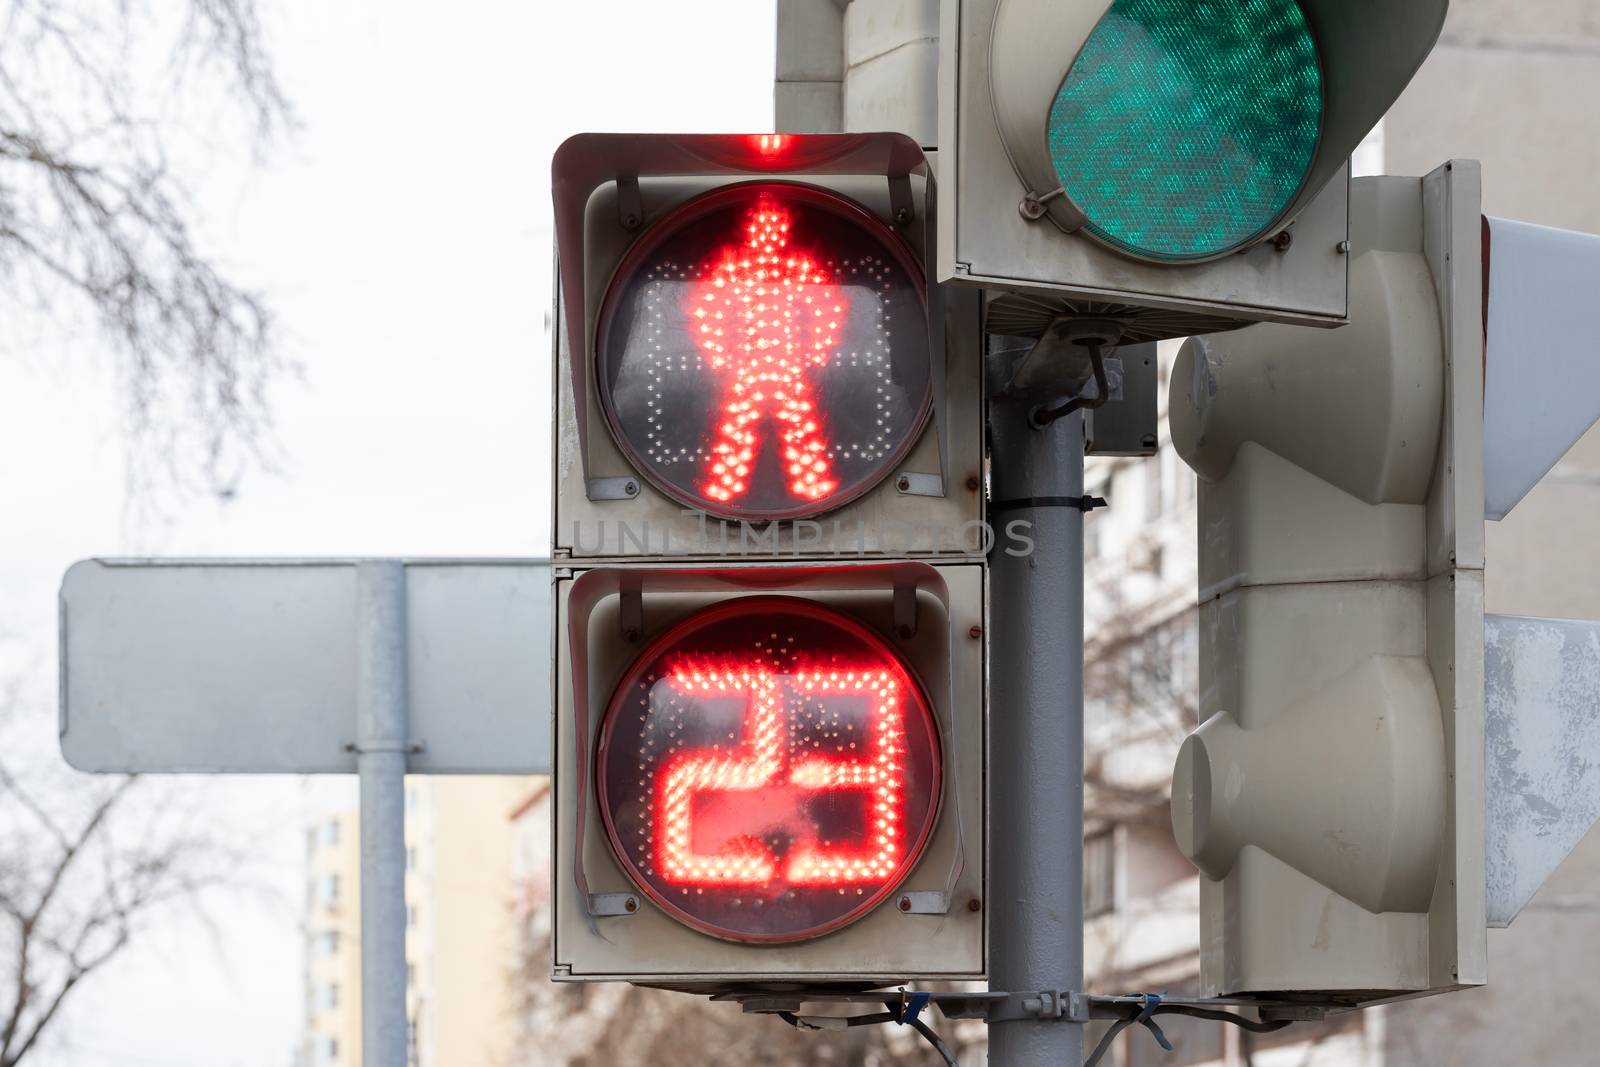 The traffic light shows red, which prohibits traffic for people. by bonilook